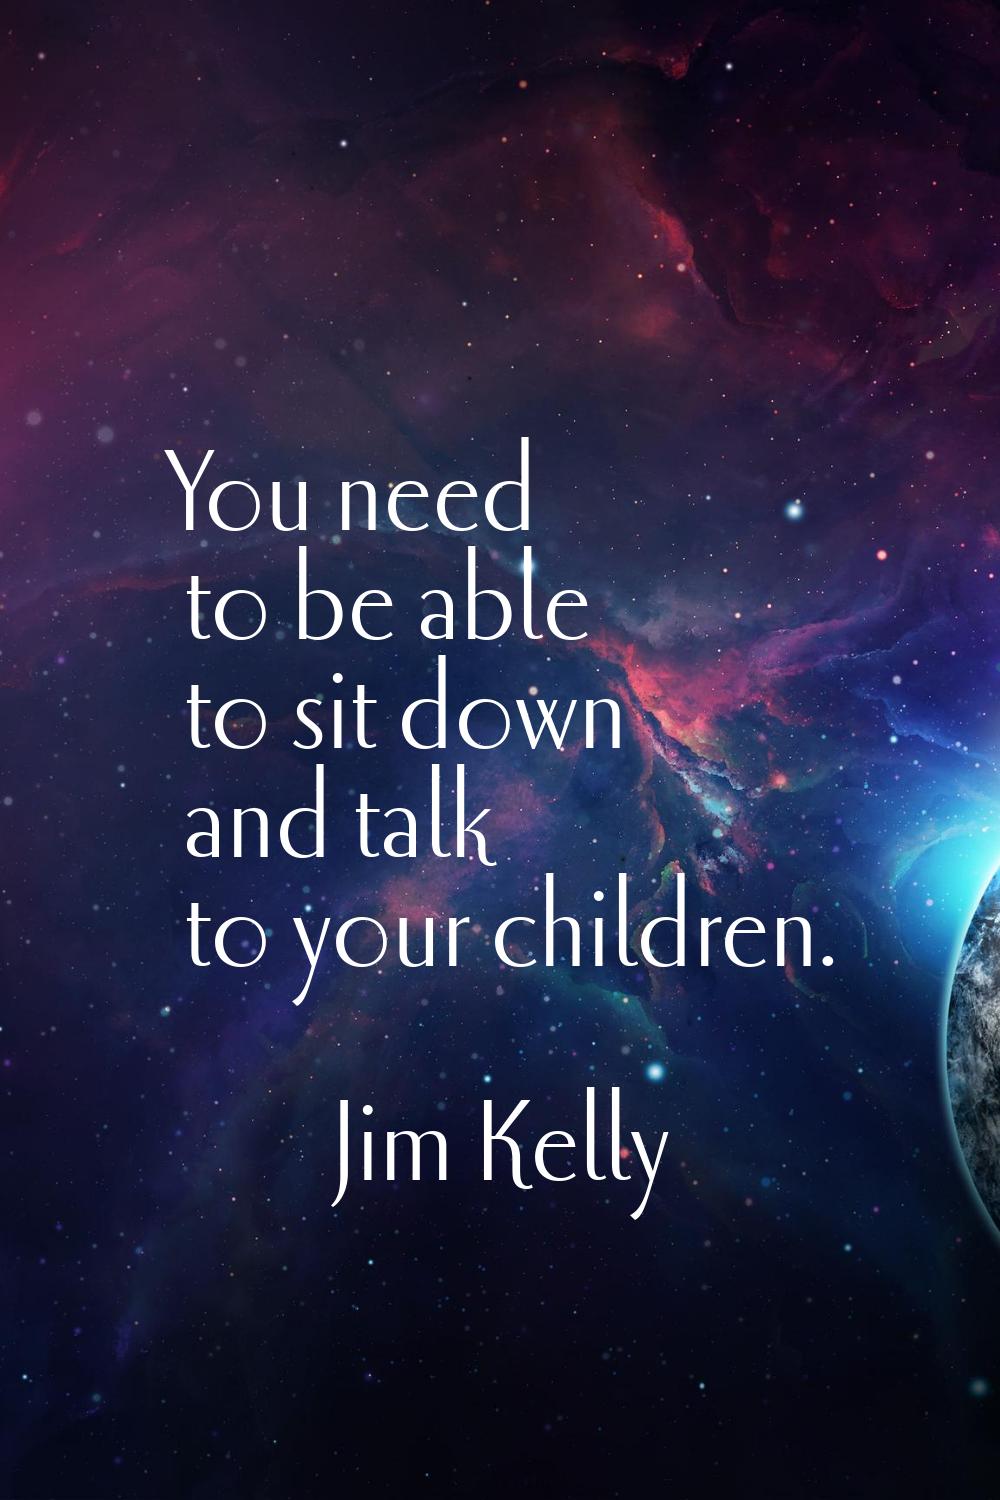 You need to be able to sit down and talk to your children.